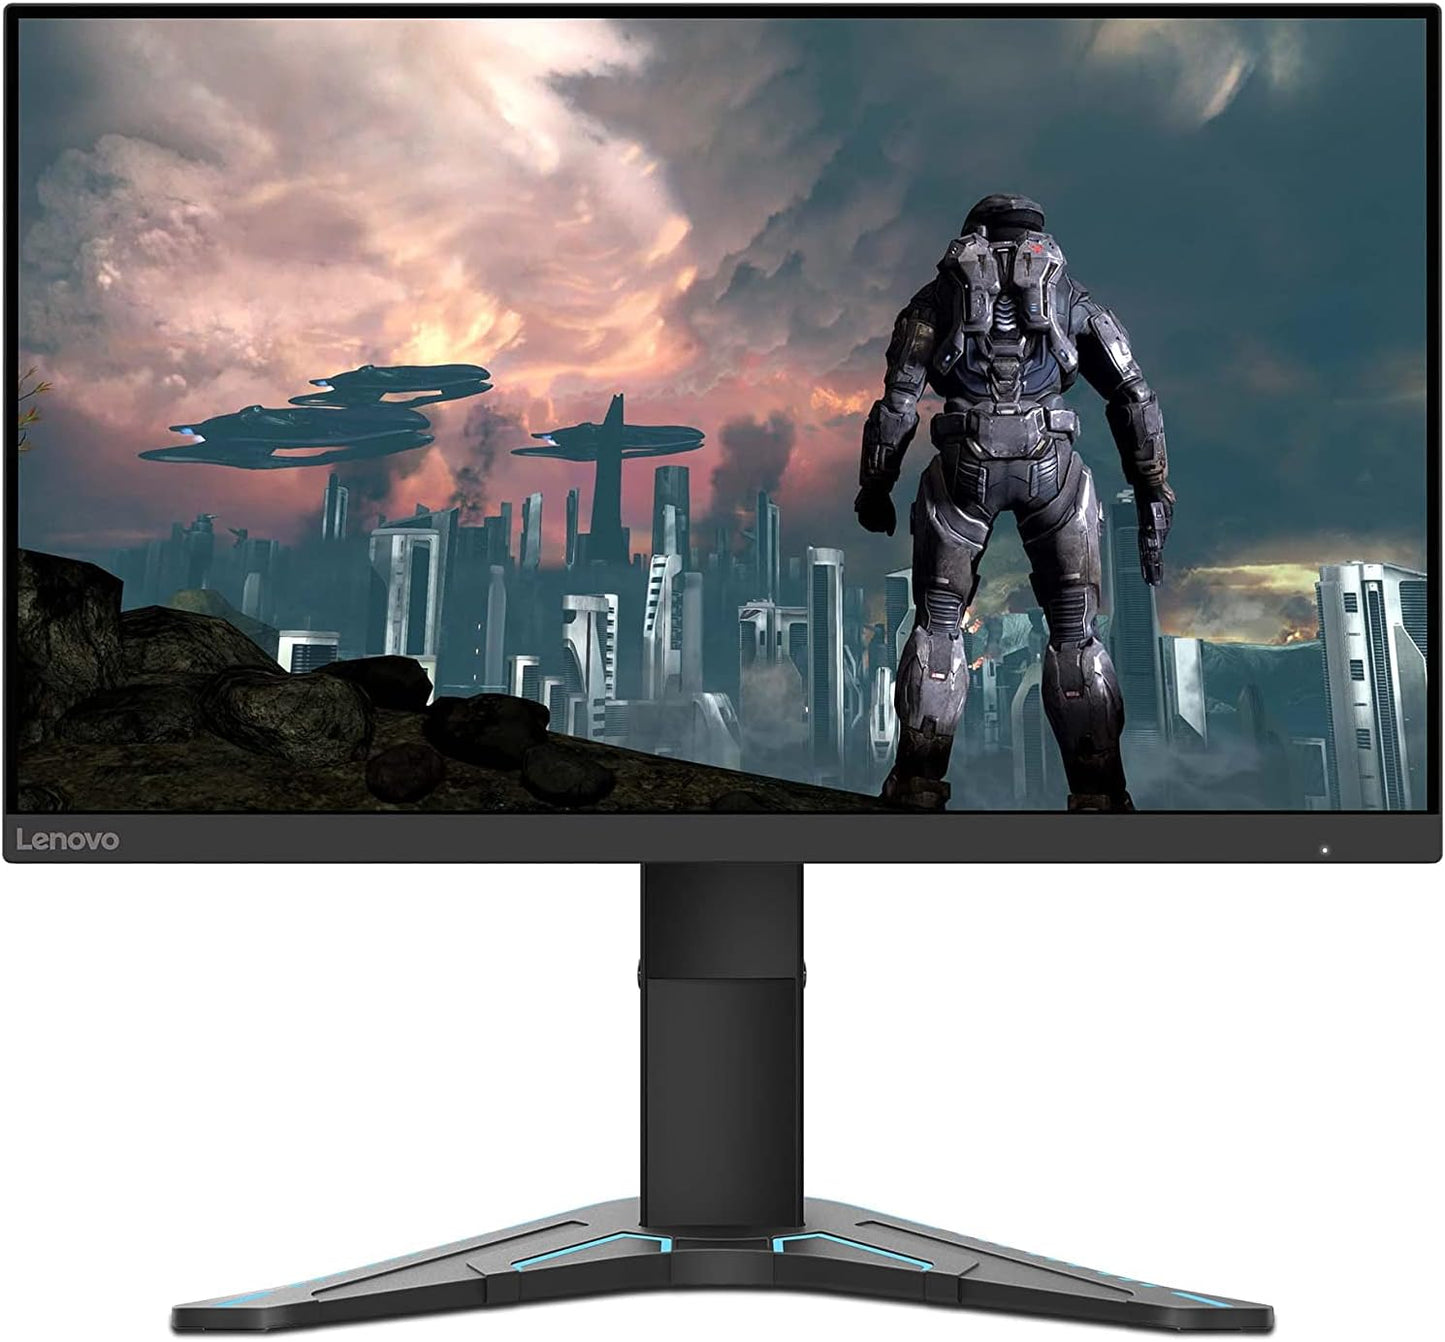 Lenovo G24-20 IPS 144 Hz (Overclock to 165Hz) FHD 0.5MS (MPRT) 350 nits Gaming Monitor Blue Light Certified - Tilt/Height Adjustable Stand - HDMI x2 & DP Port